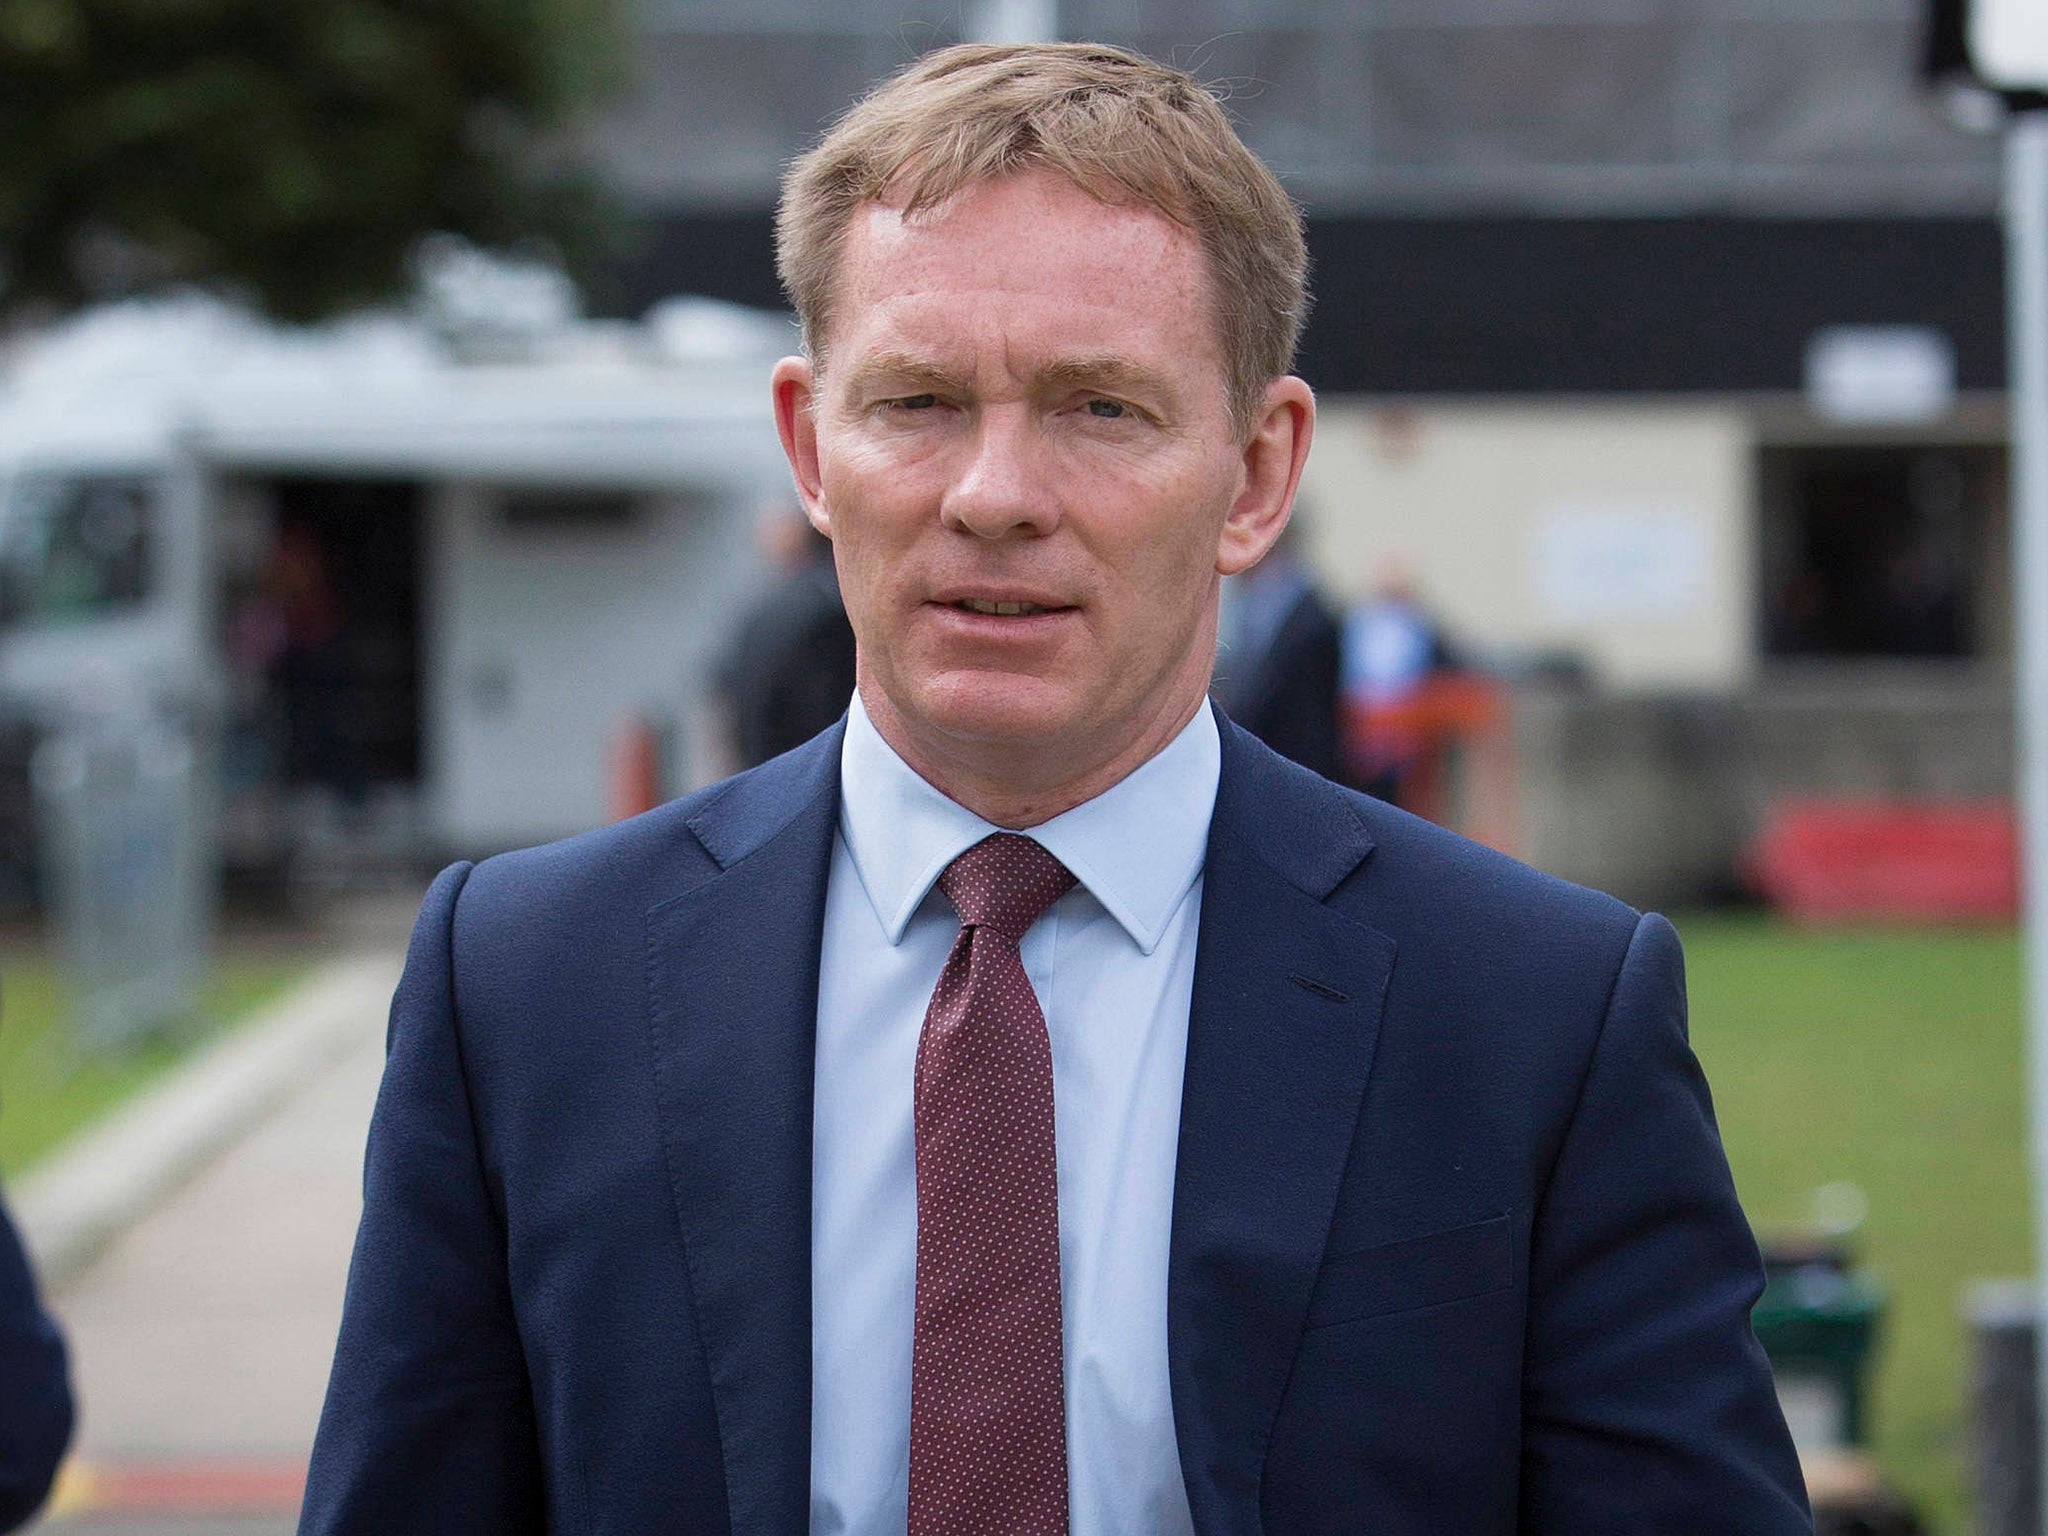 Labour MP Chris Bryant said he has 'never known the Labour party be in such an unpleasant state'